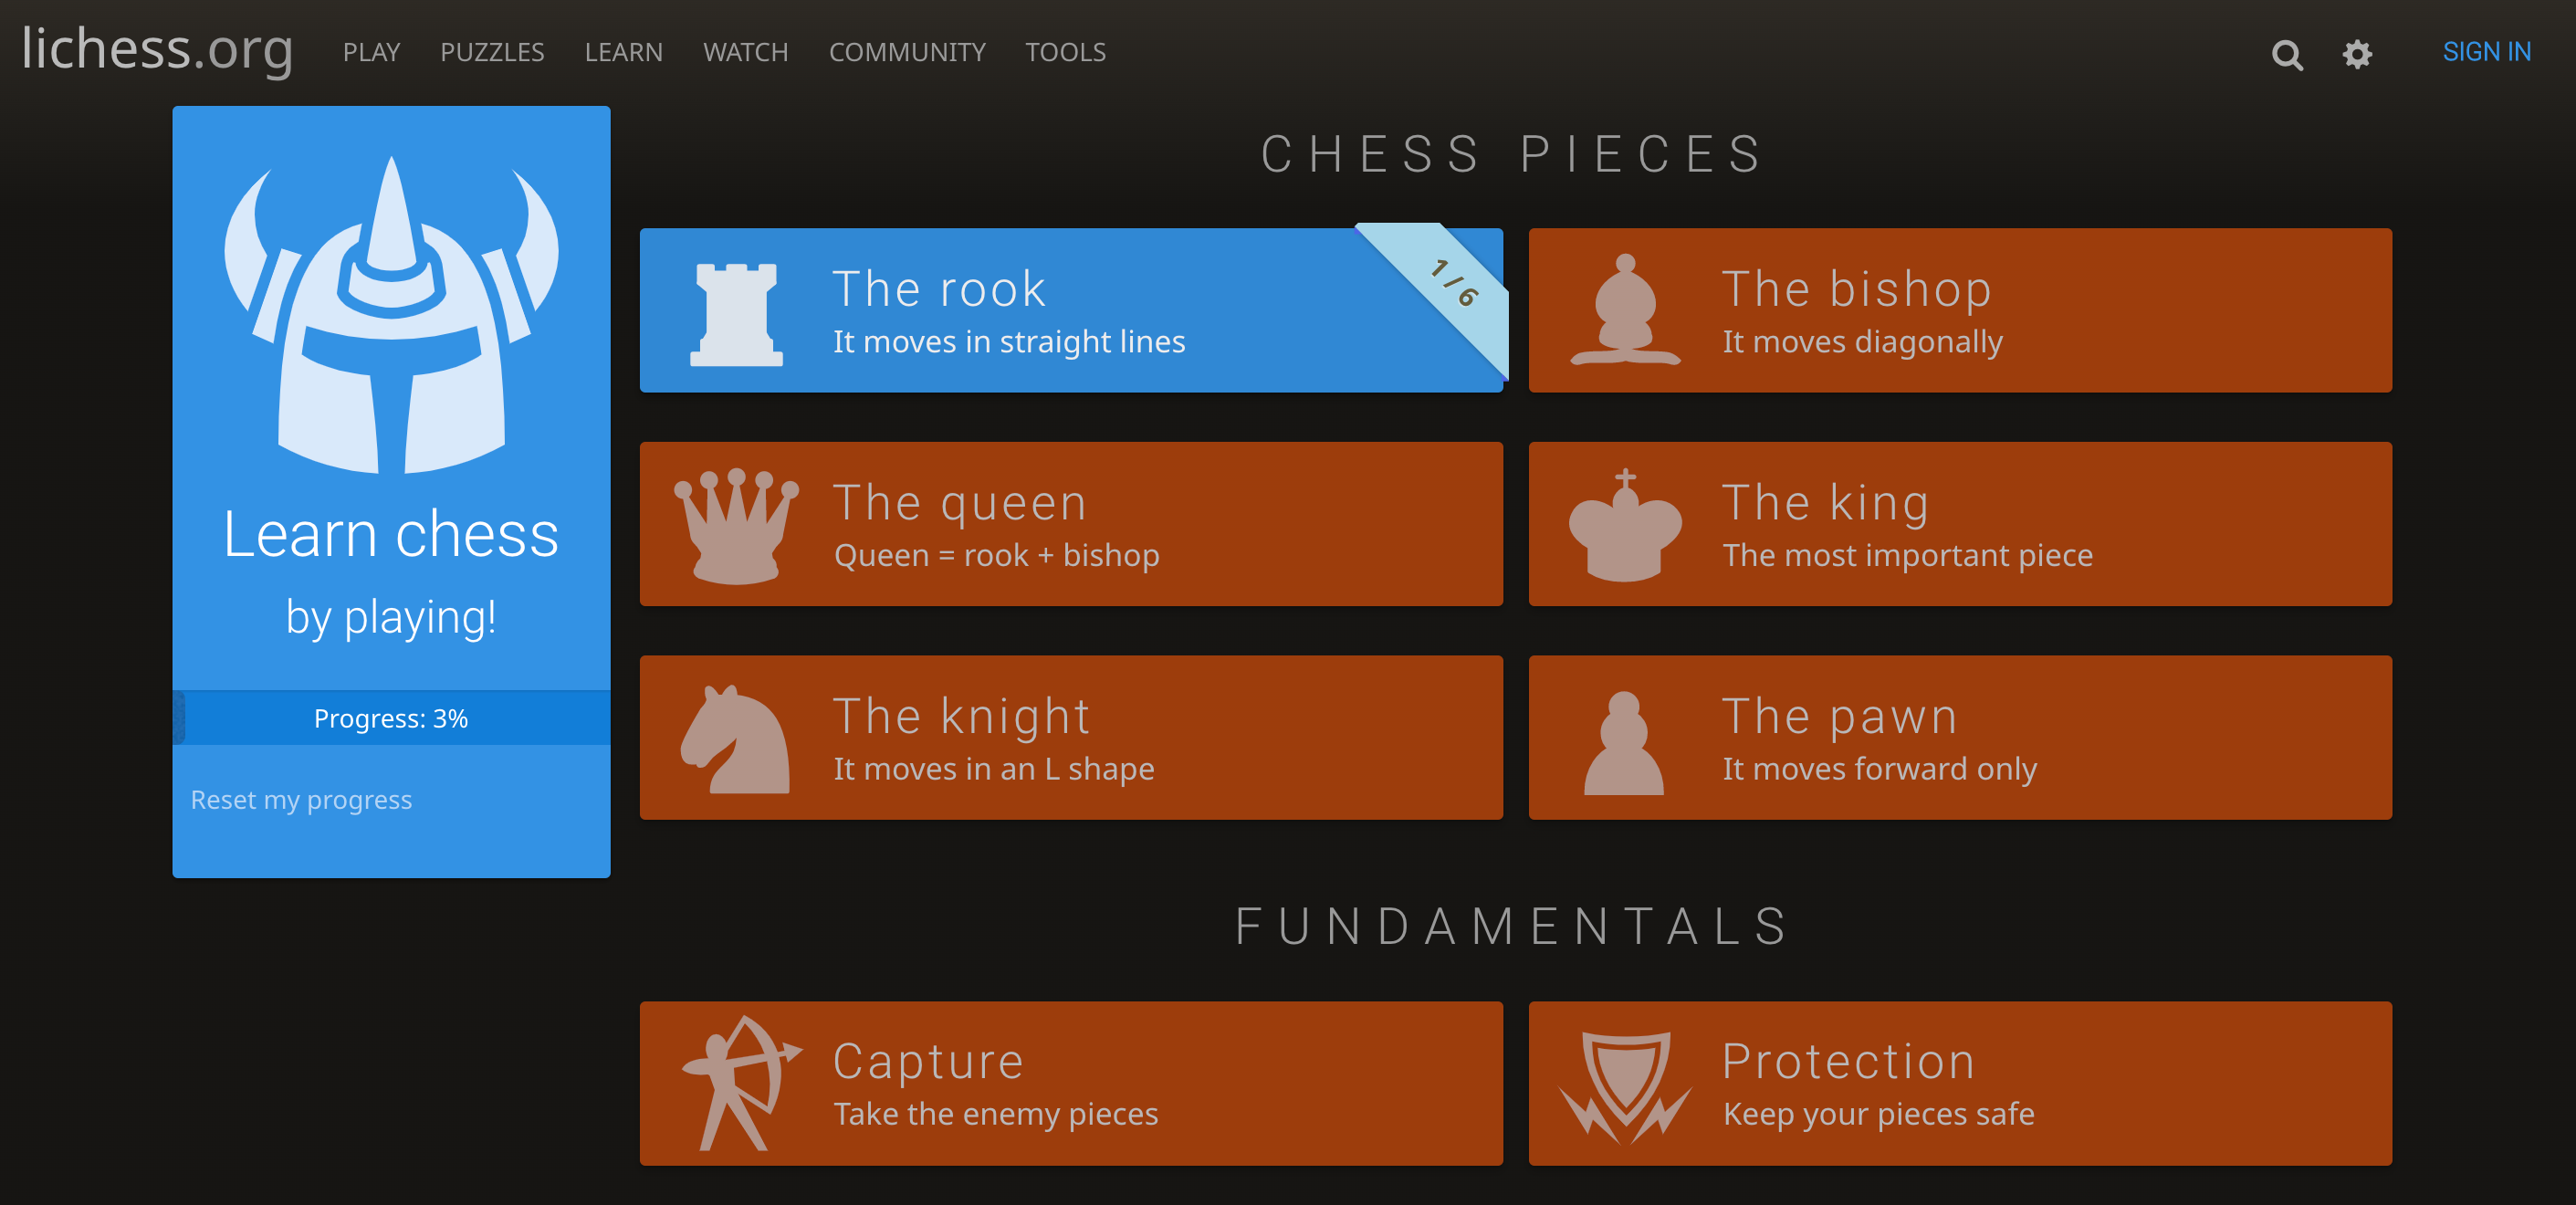 Learn Chess By Playing!